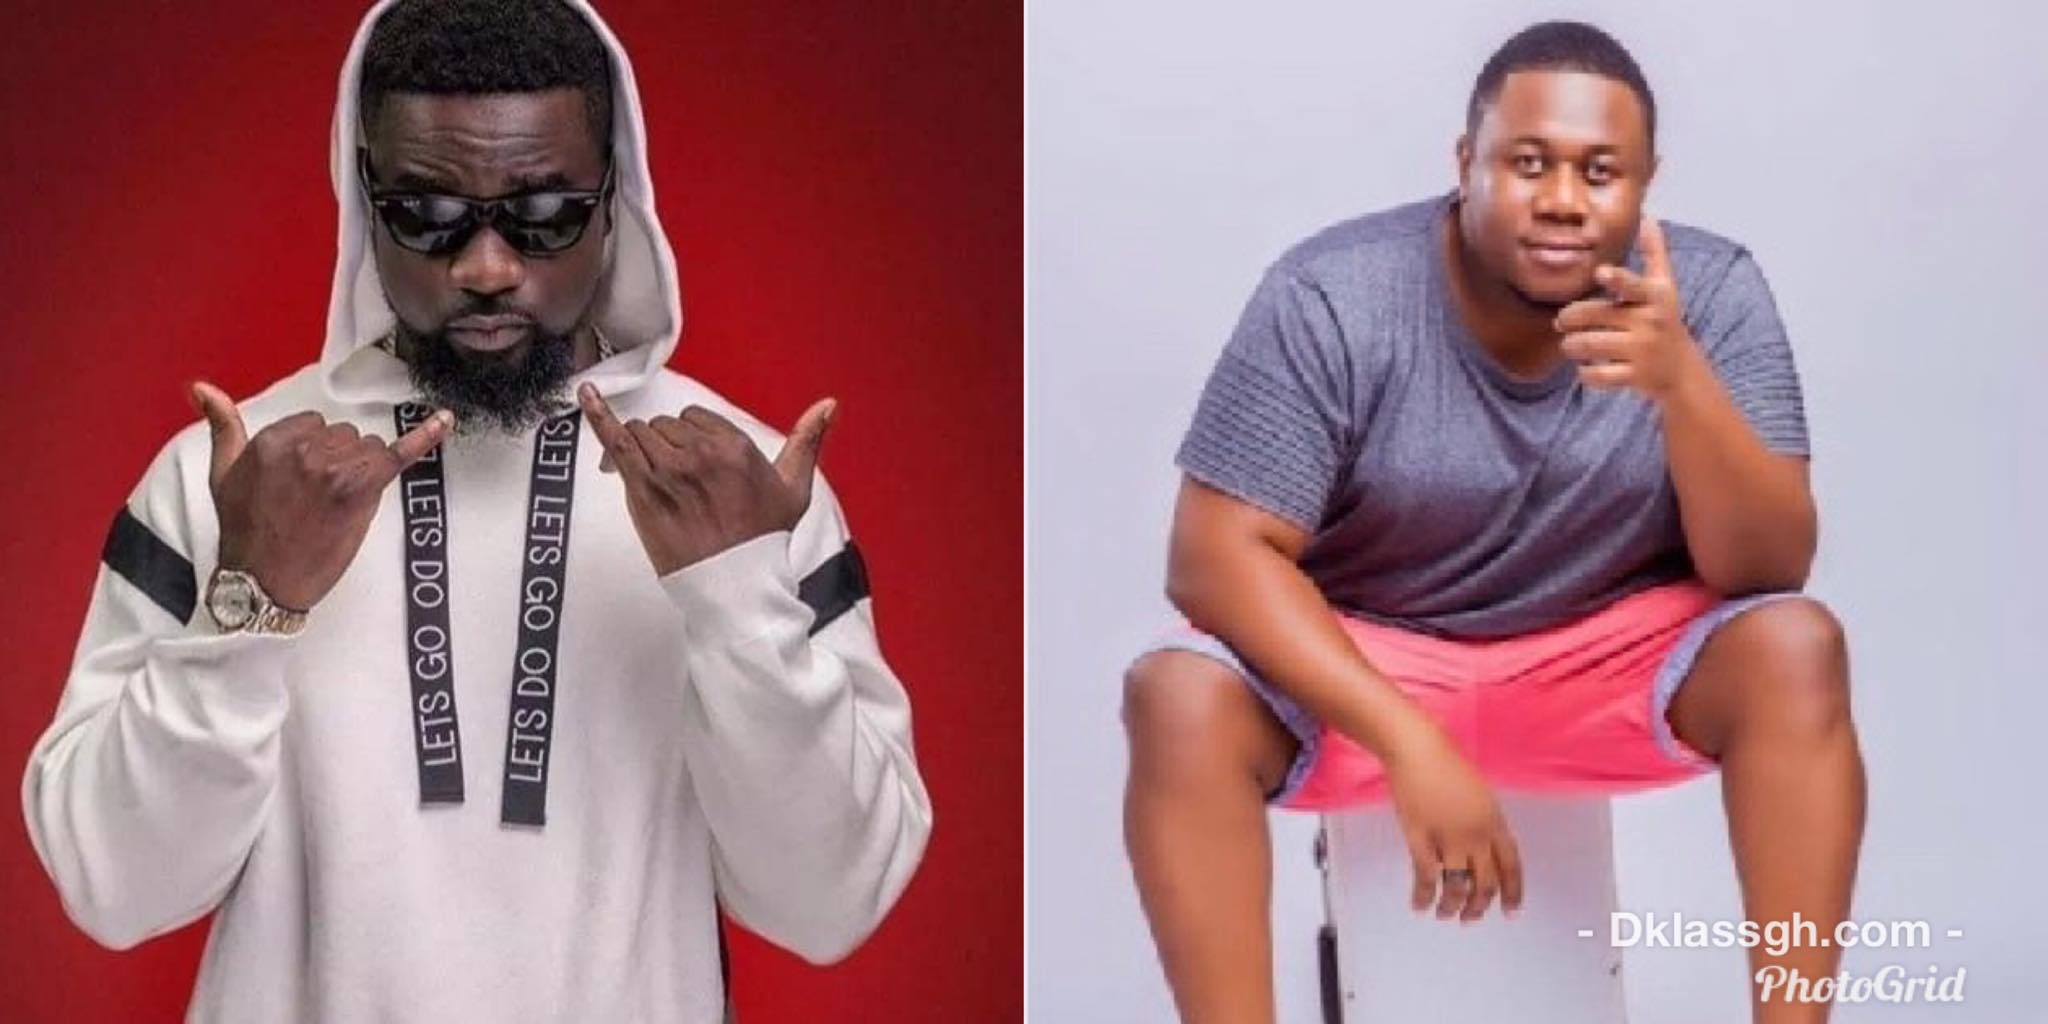 Stop pairing the music producers, Most hate themselves - Nacee’s ‘boy’ tells Sarkodie